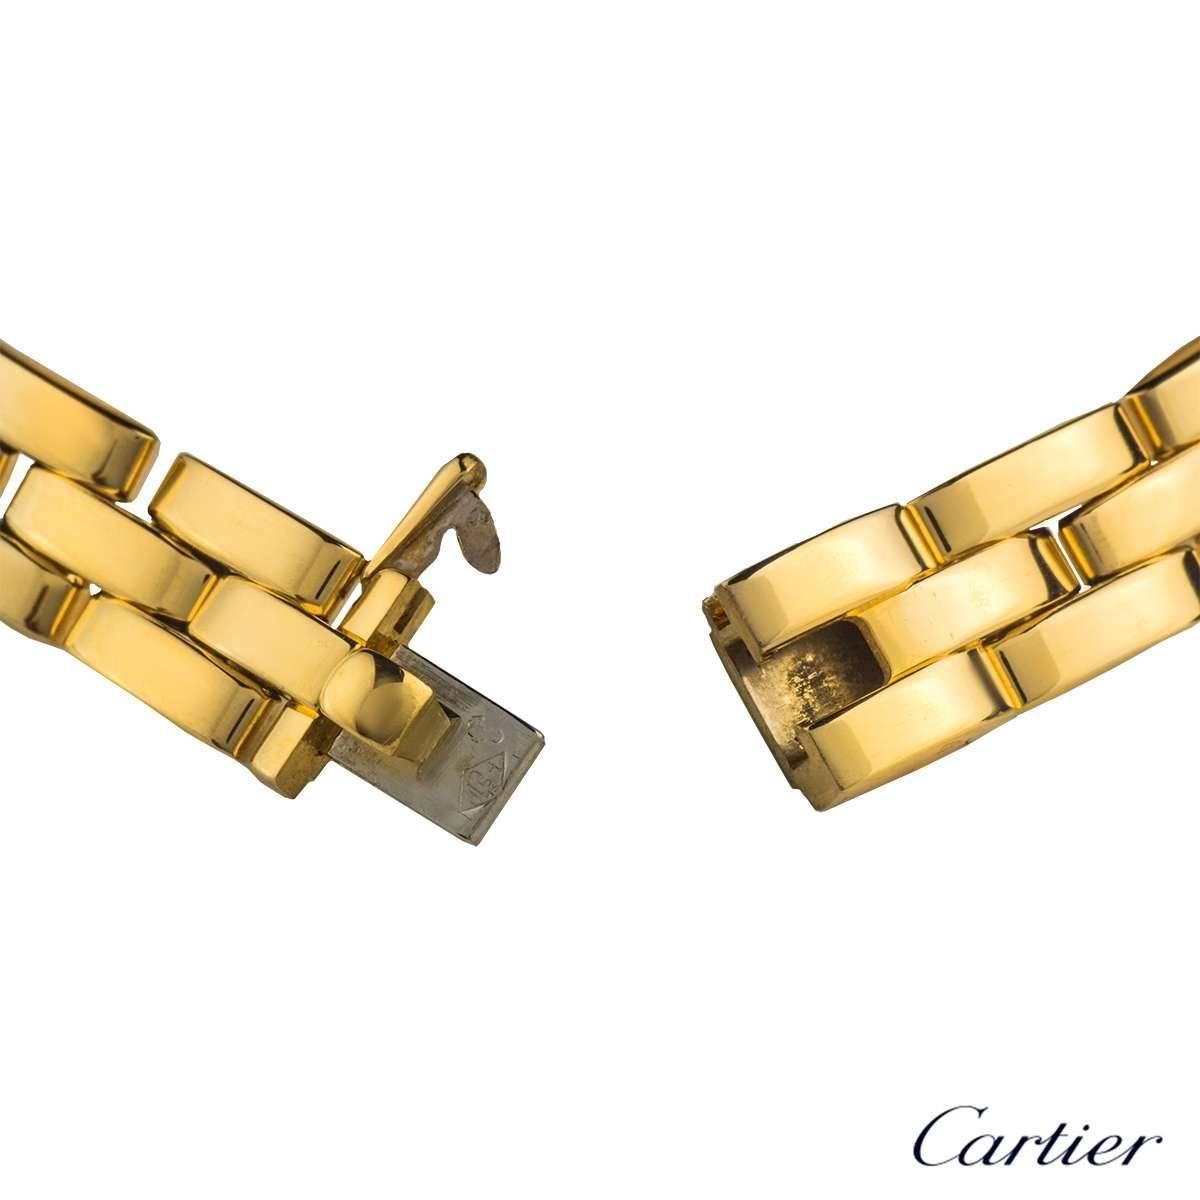 A beautiful 18k yellow gold Cartier bracelet from the Maillon Panthere collection. The bracelet comprises of 3 rows of linked gold bars measuring a length of 7.45 inches. The bracelet features a box clasp with a side lock for security and has a